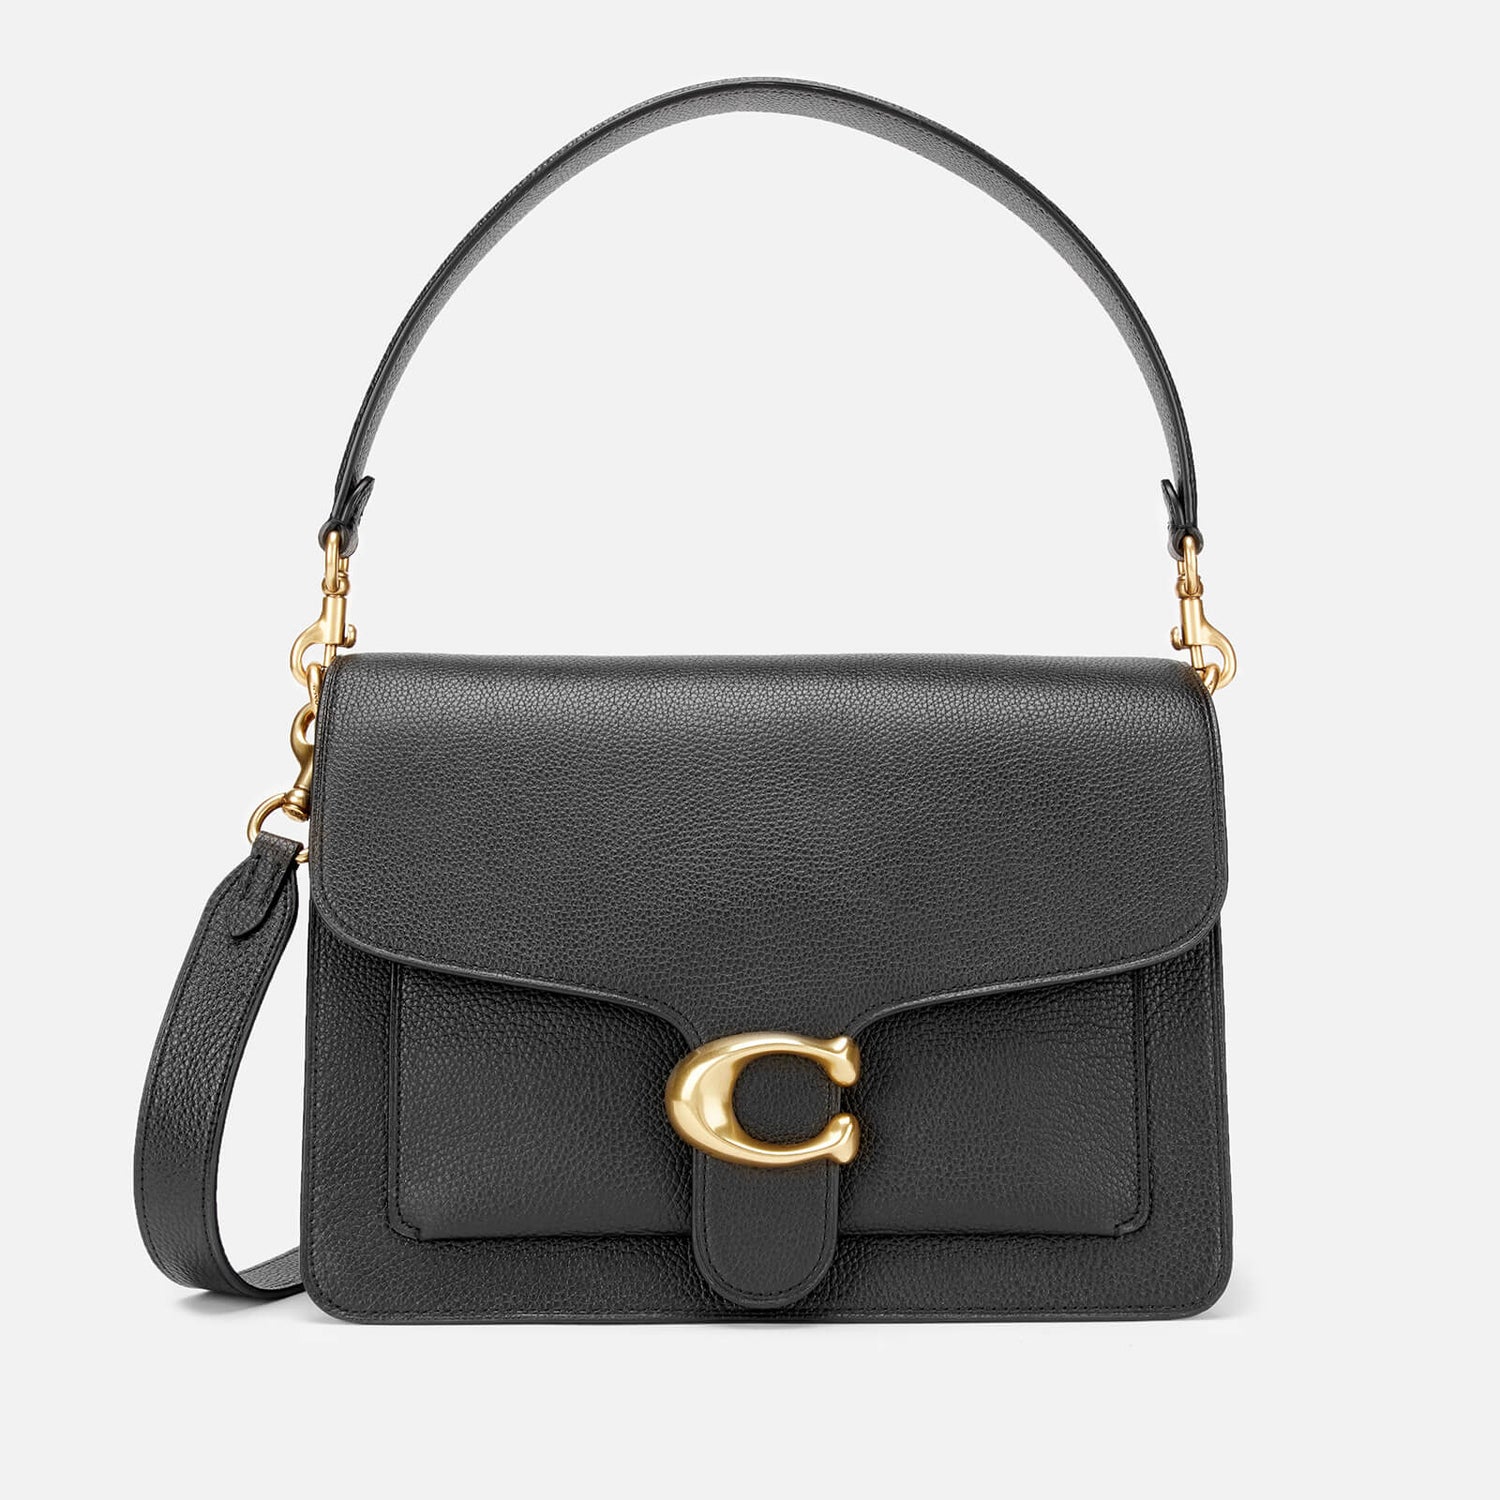 coach tabby bag review